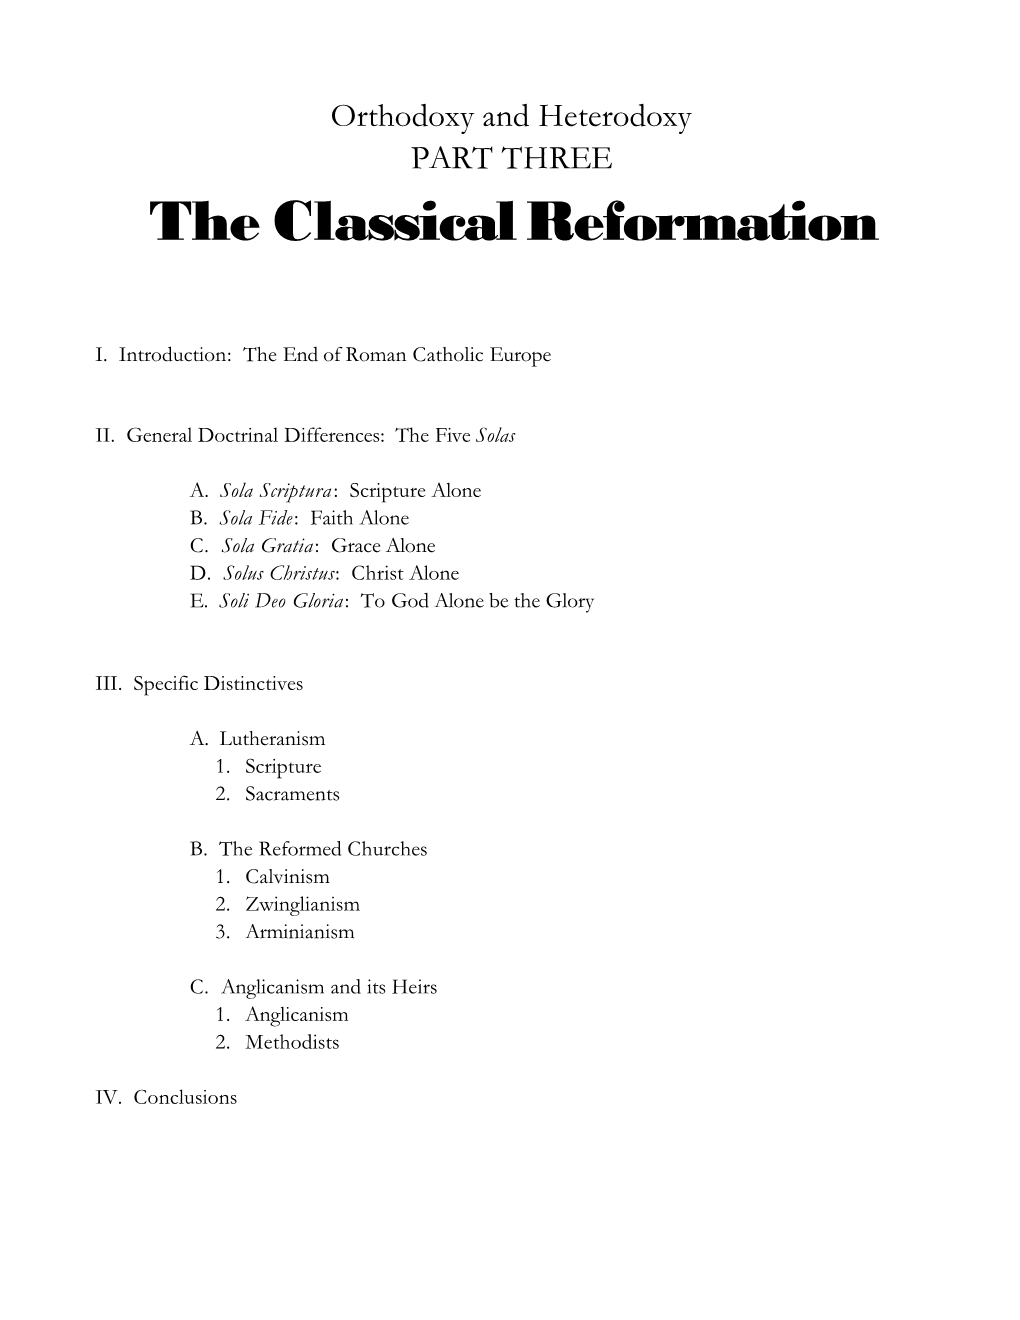 The Classical Reformation